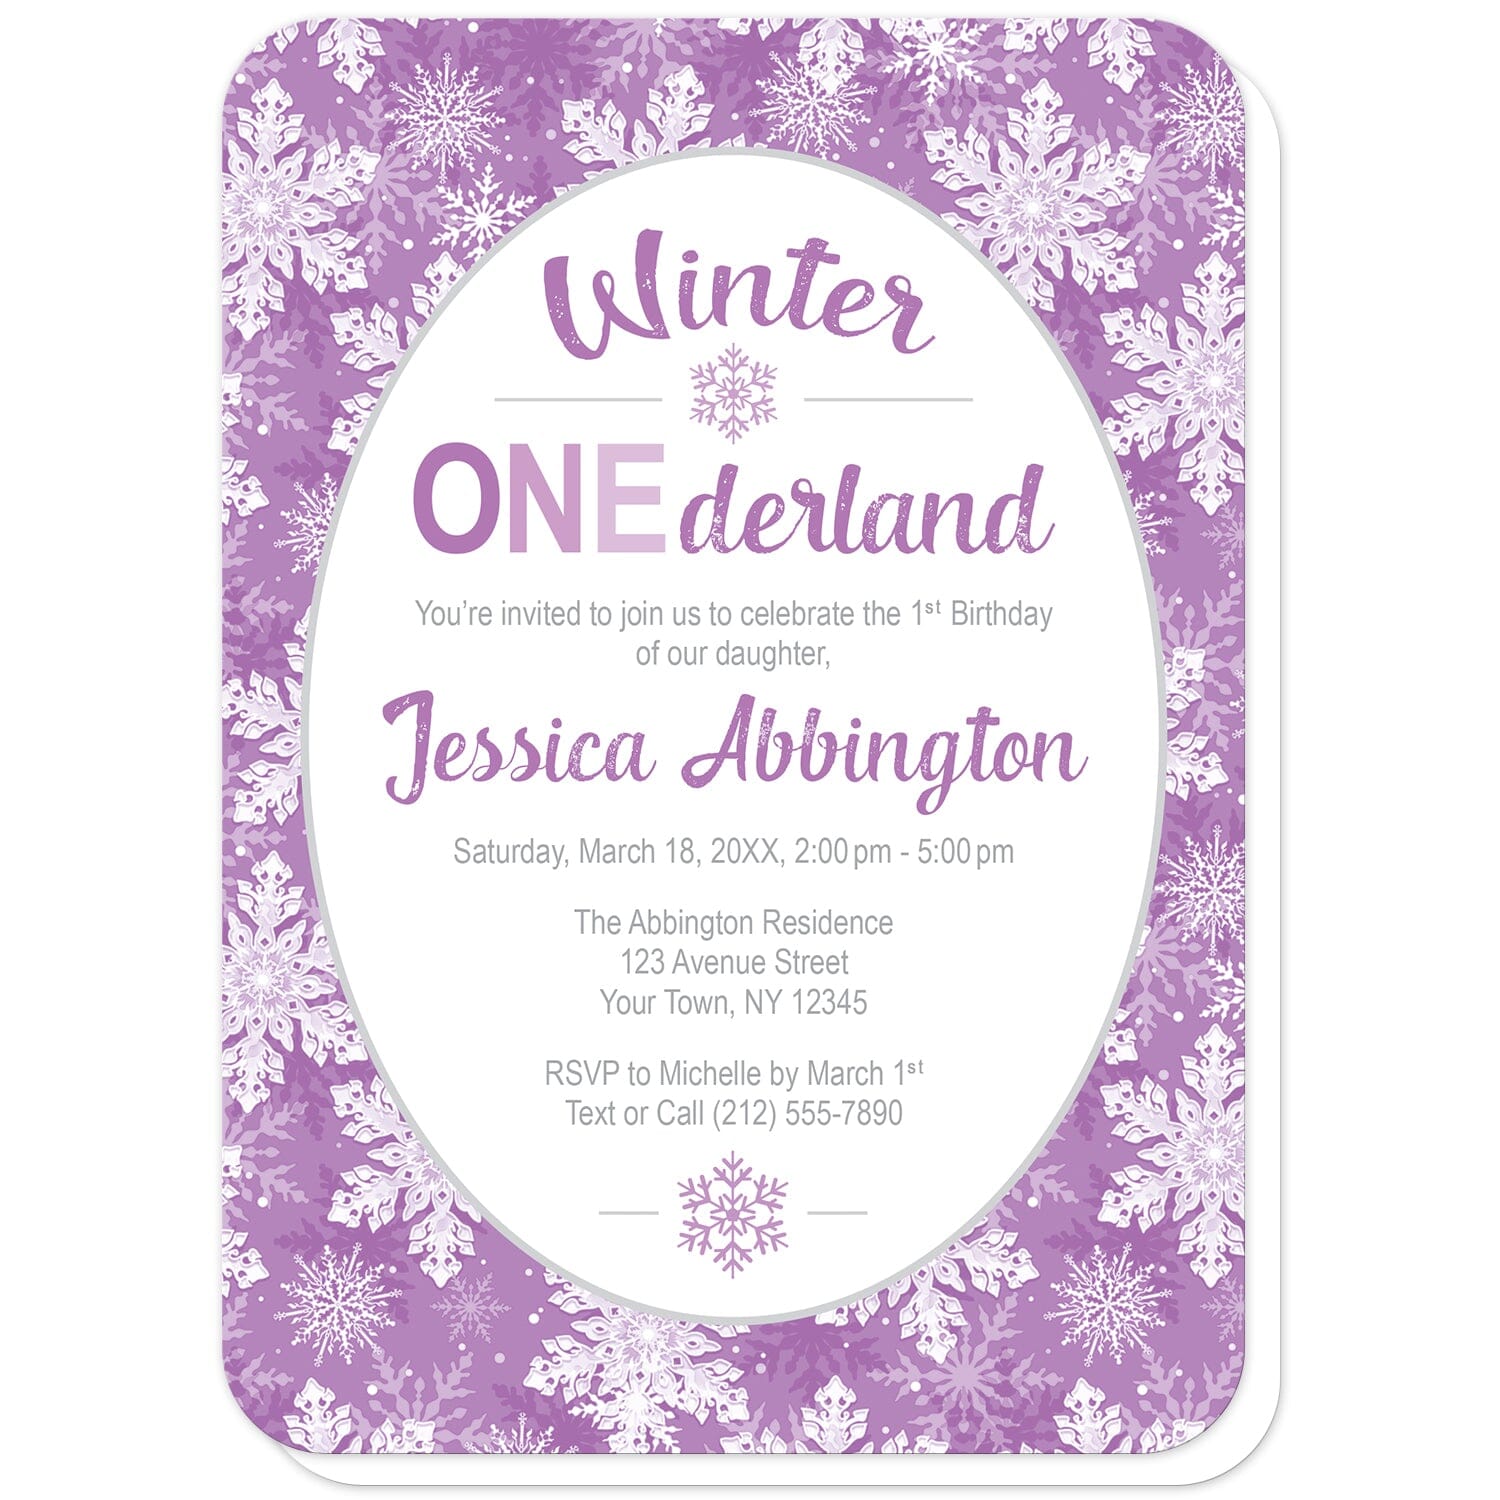 Purple Snowflake 1st Birthday Winter Onederland Invitations (with rounded corners) at Artistically Invited. Beautifully ornate purple snowflake 1st birthday Winter Onederland invitations designed with your personalized 1st birthday party details custom printed in purple and gray in a white oval frame design over a pretty purple and white snowflake pattern background.